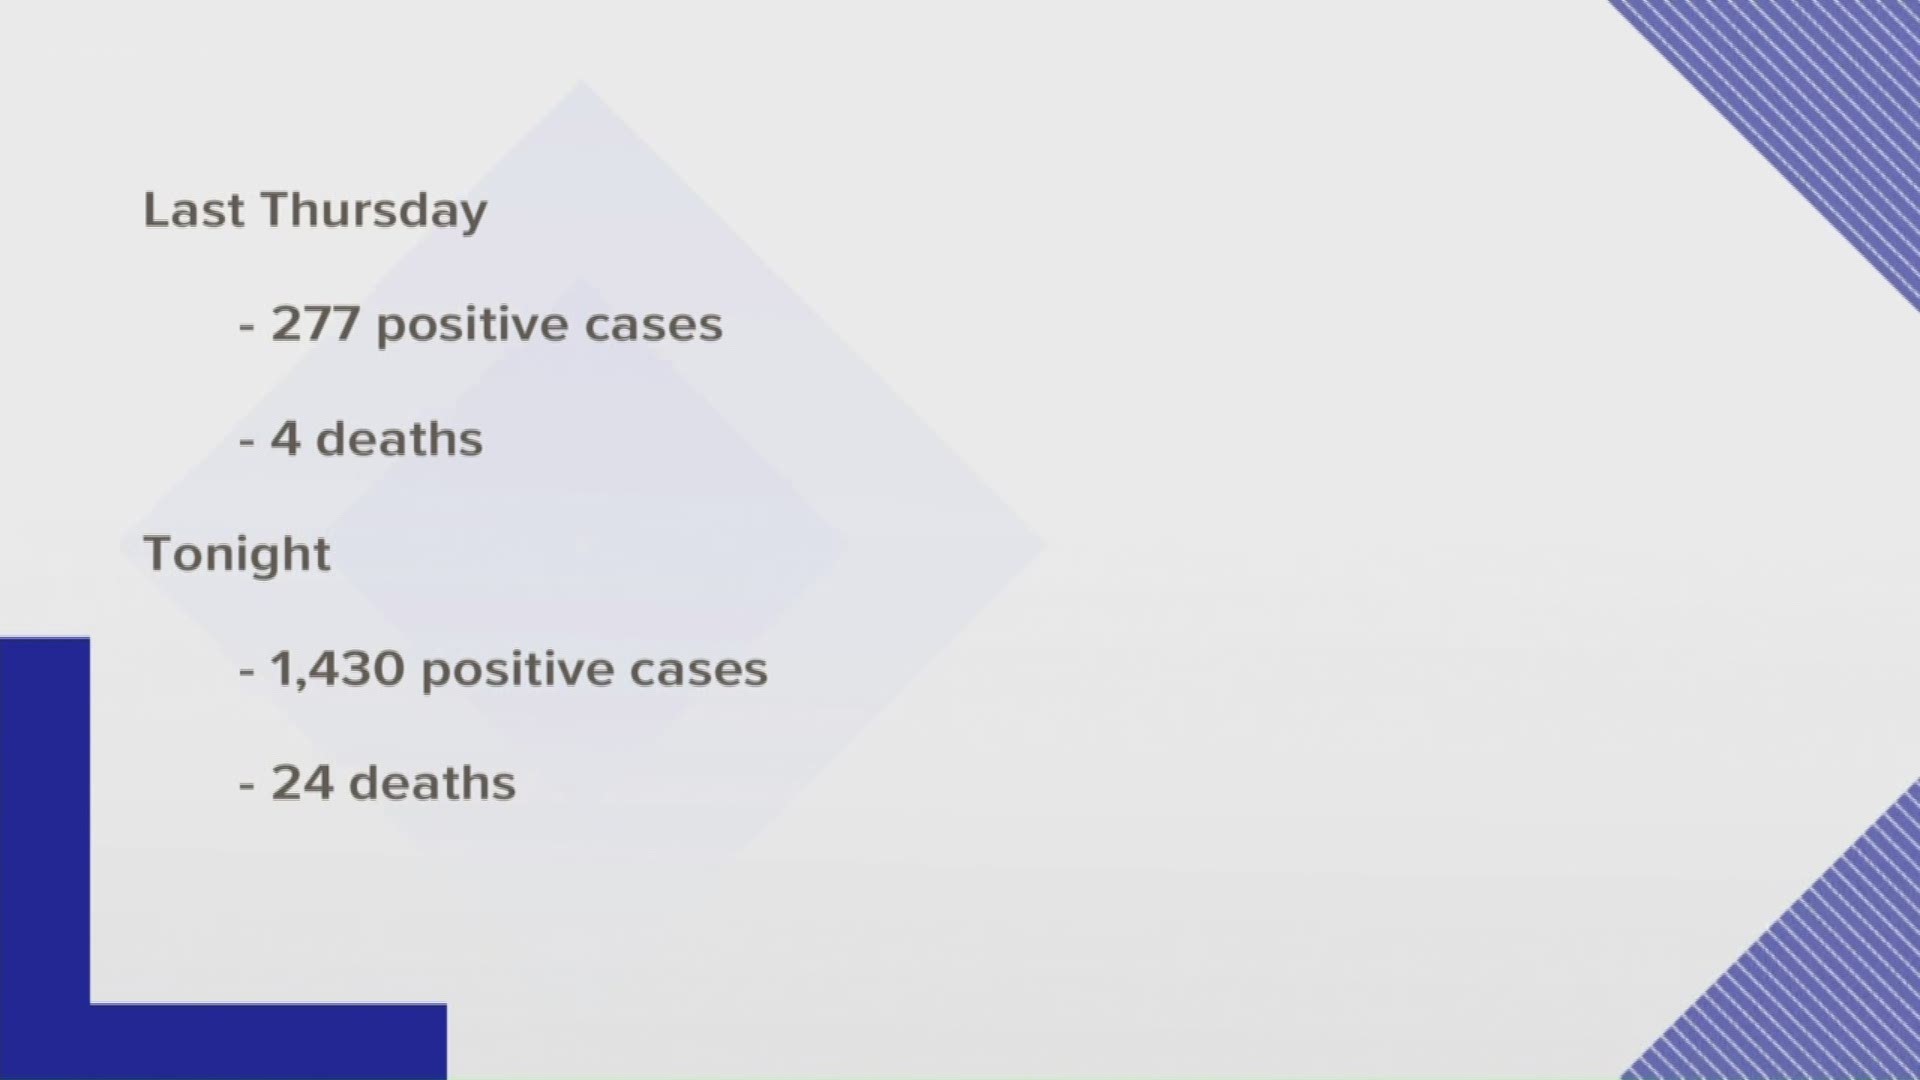 There are nearly 1,200 more positive COVID-19 cases than there were a week ago.